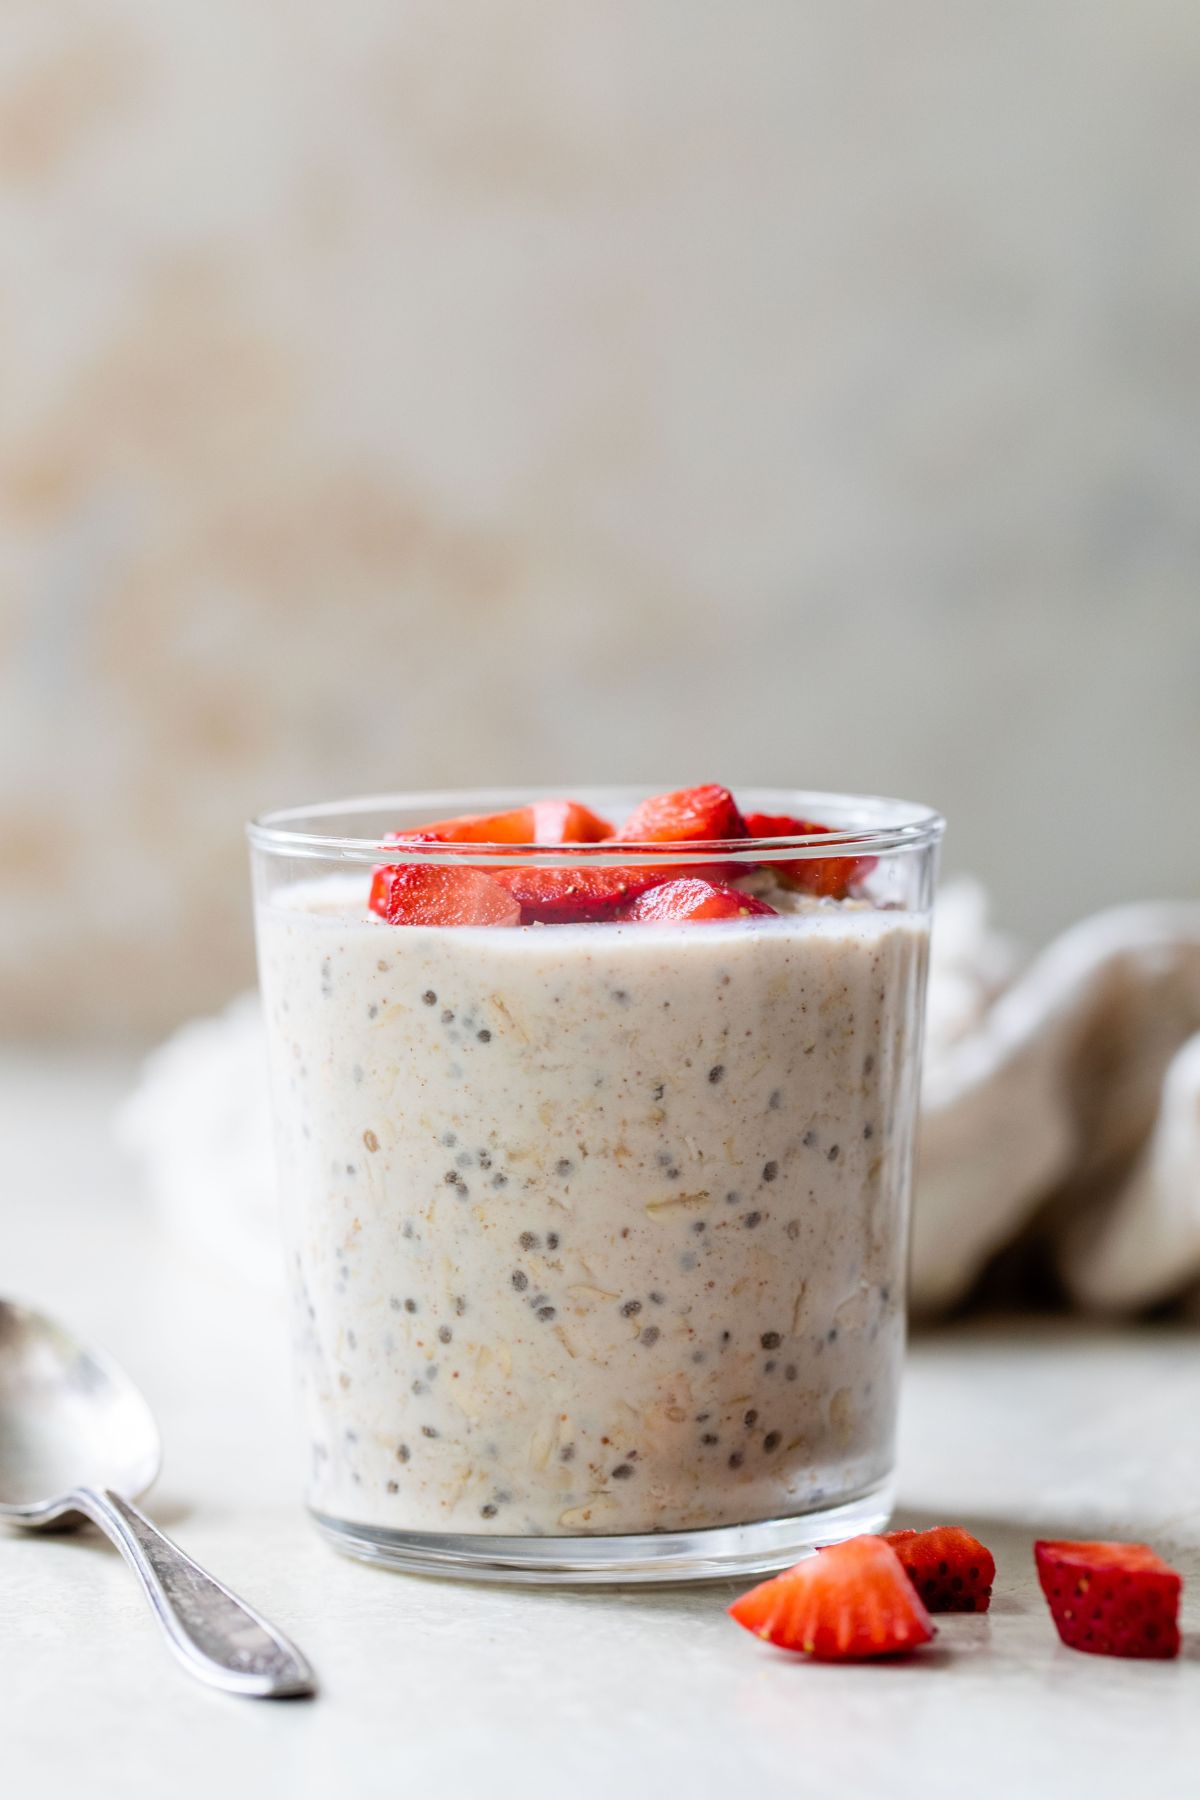 Overnight oats in a glass topped with fresh chopped strawberries.